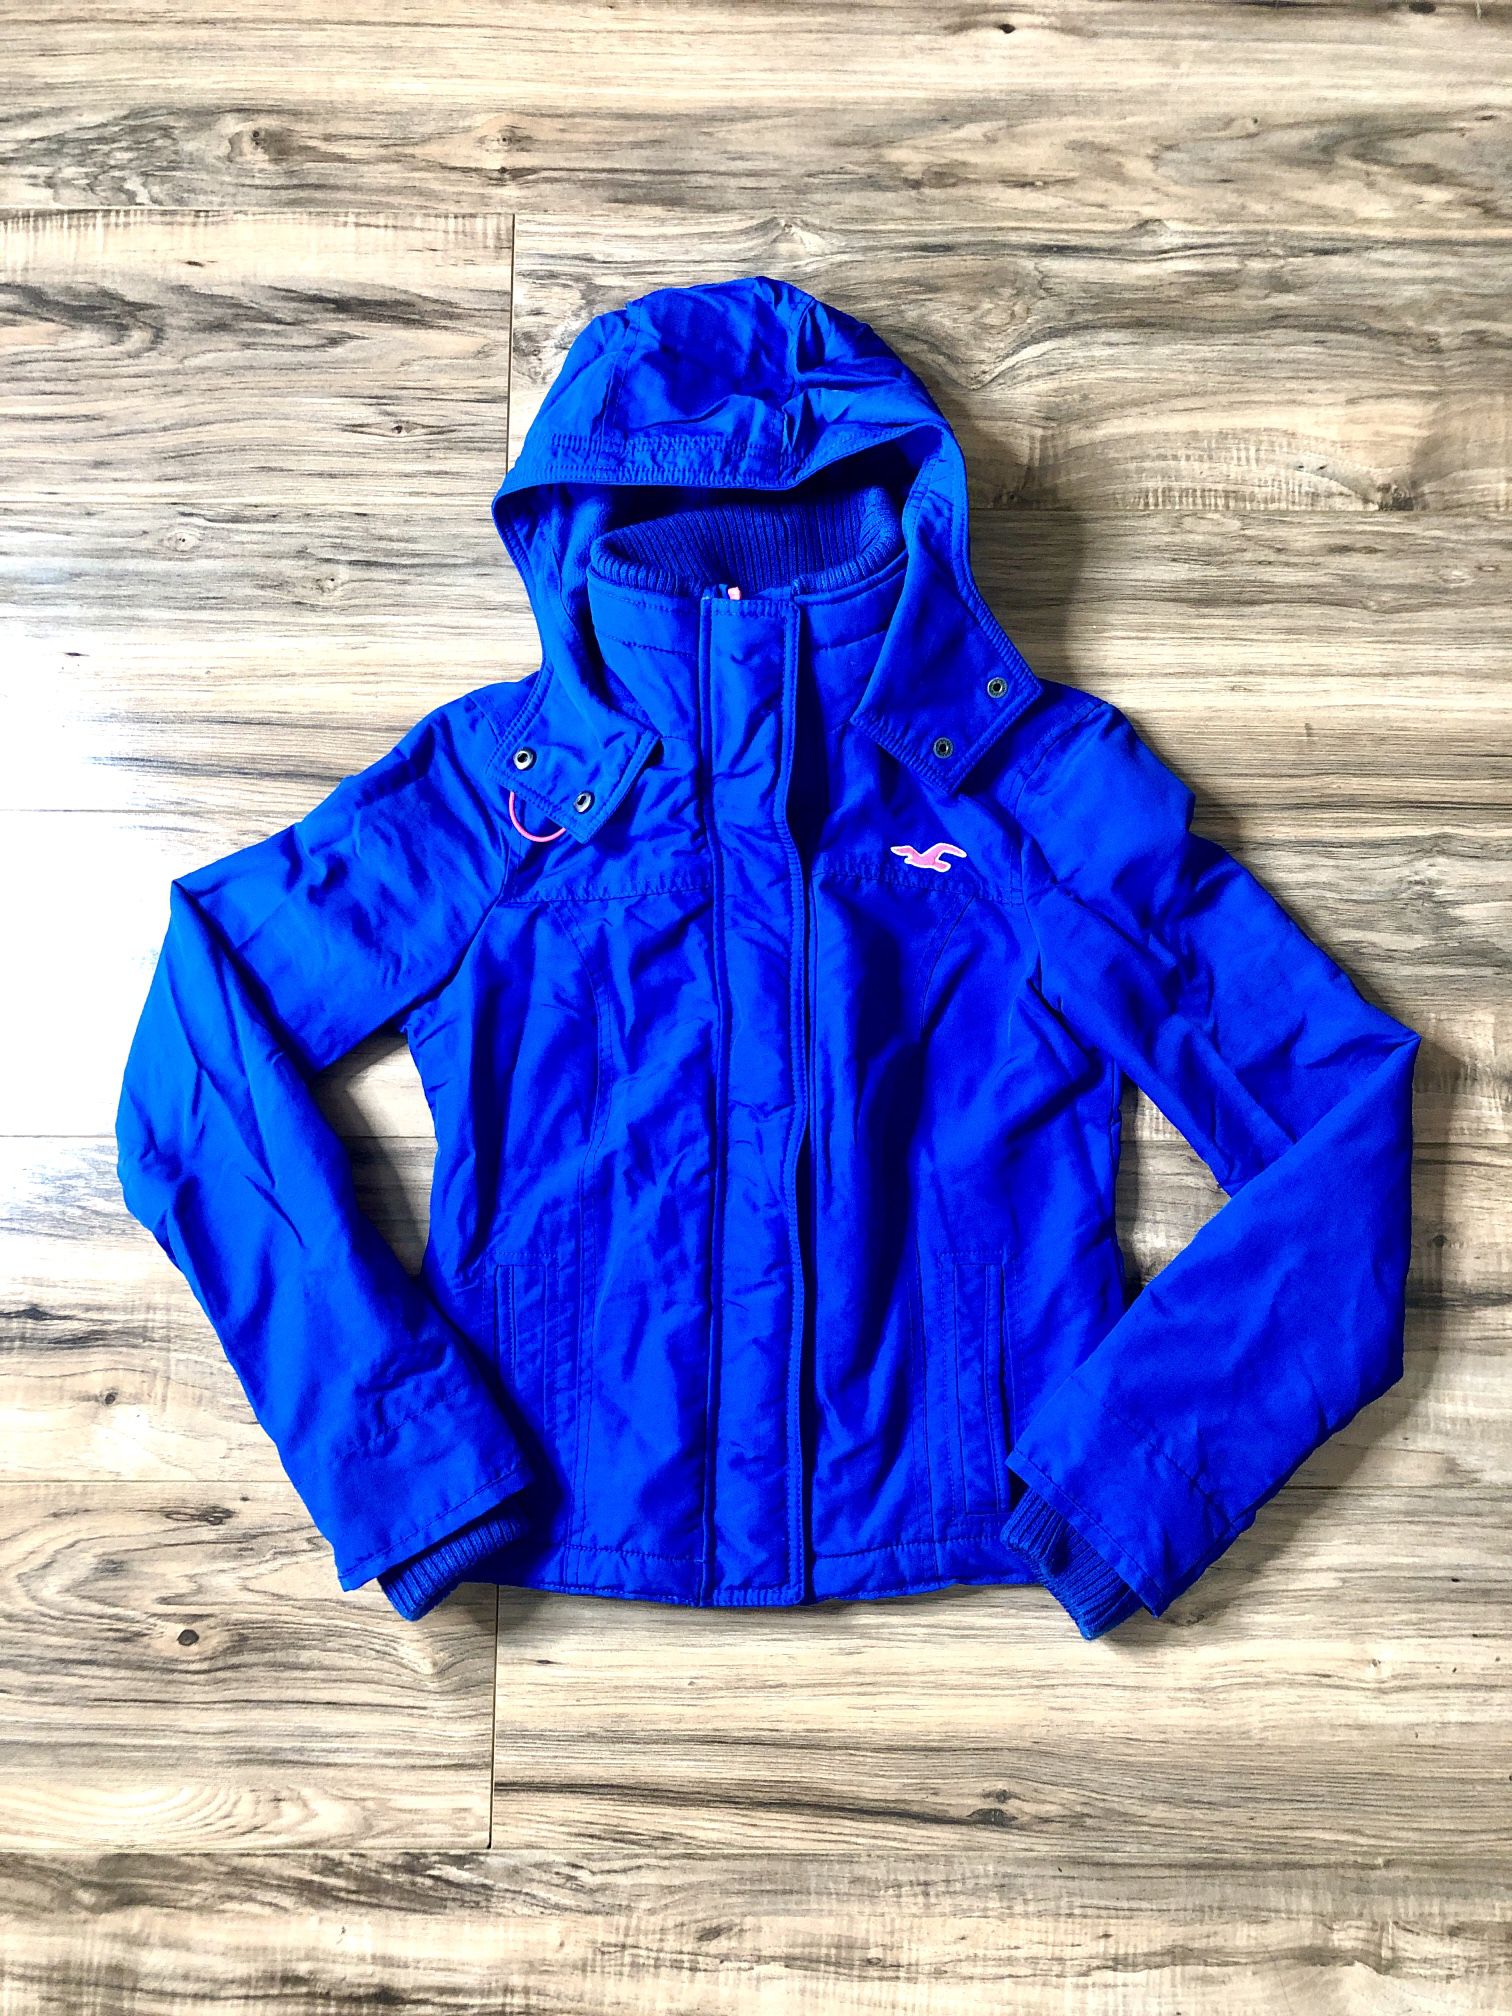 HOLLISTER ALL WEATHER JACKET ANORAK SIZE SMALL(SLIM) GORGEOUS COAT